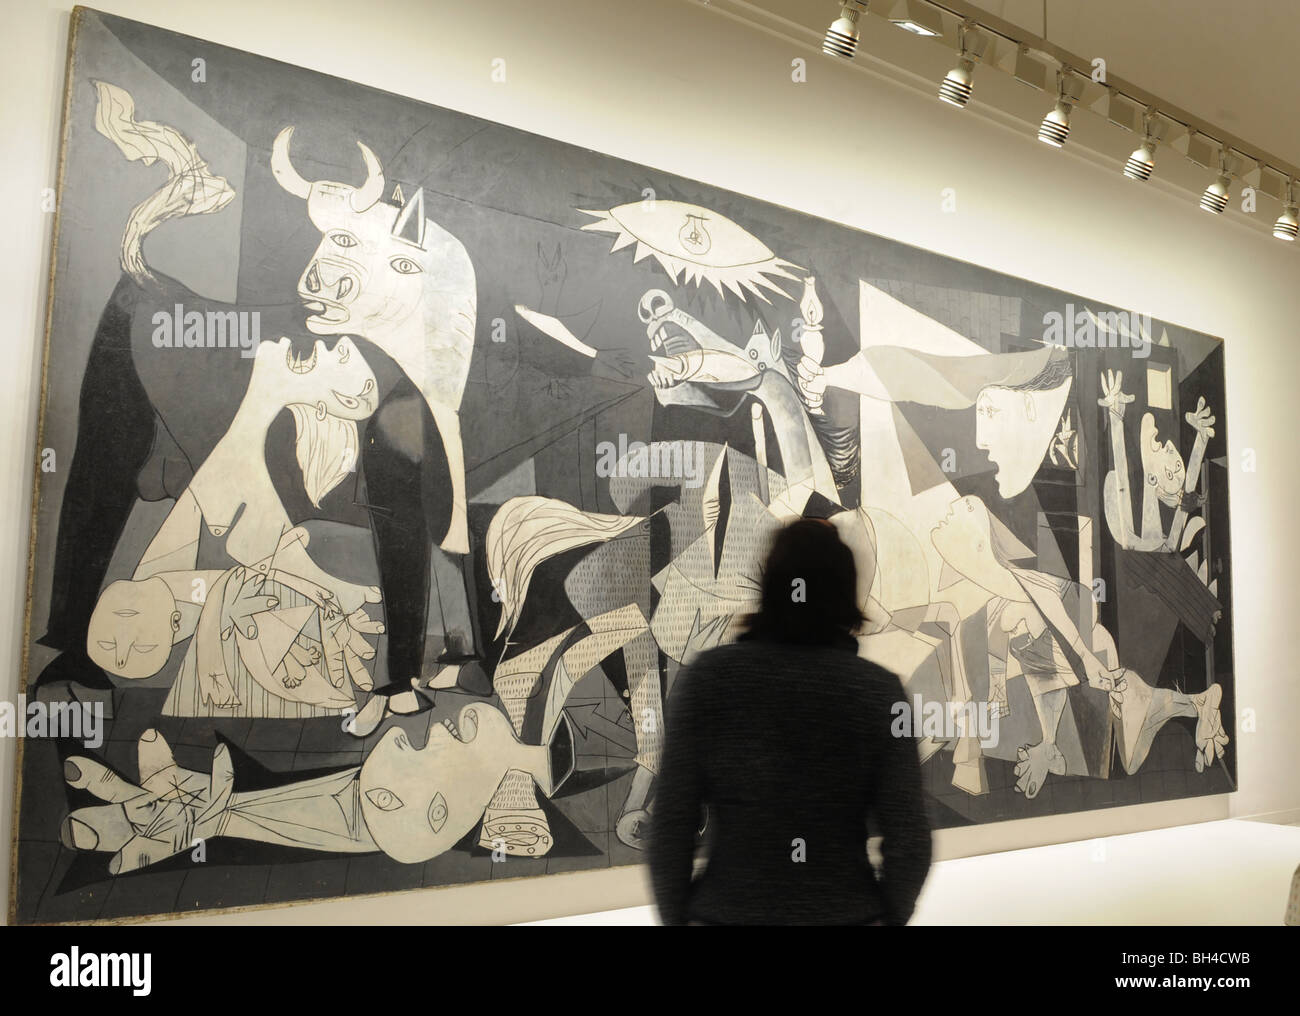 Pablo Picasso's painting Guernica at the Centro de Arte Reina Sofia in Madrid, Spain. Stock Photo